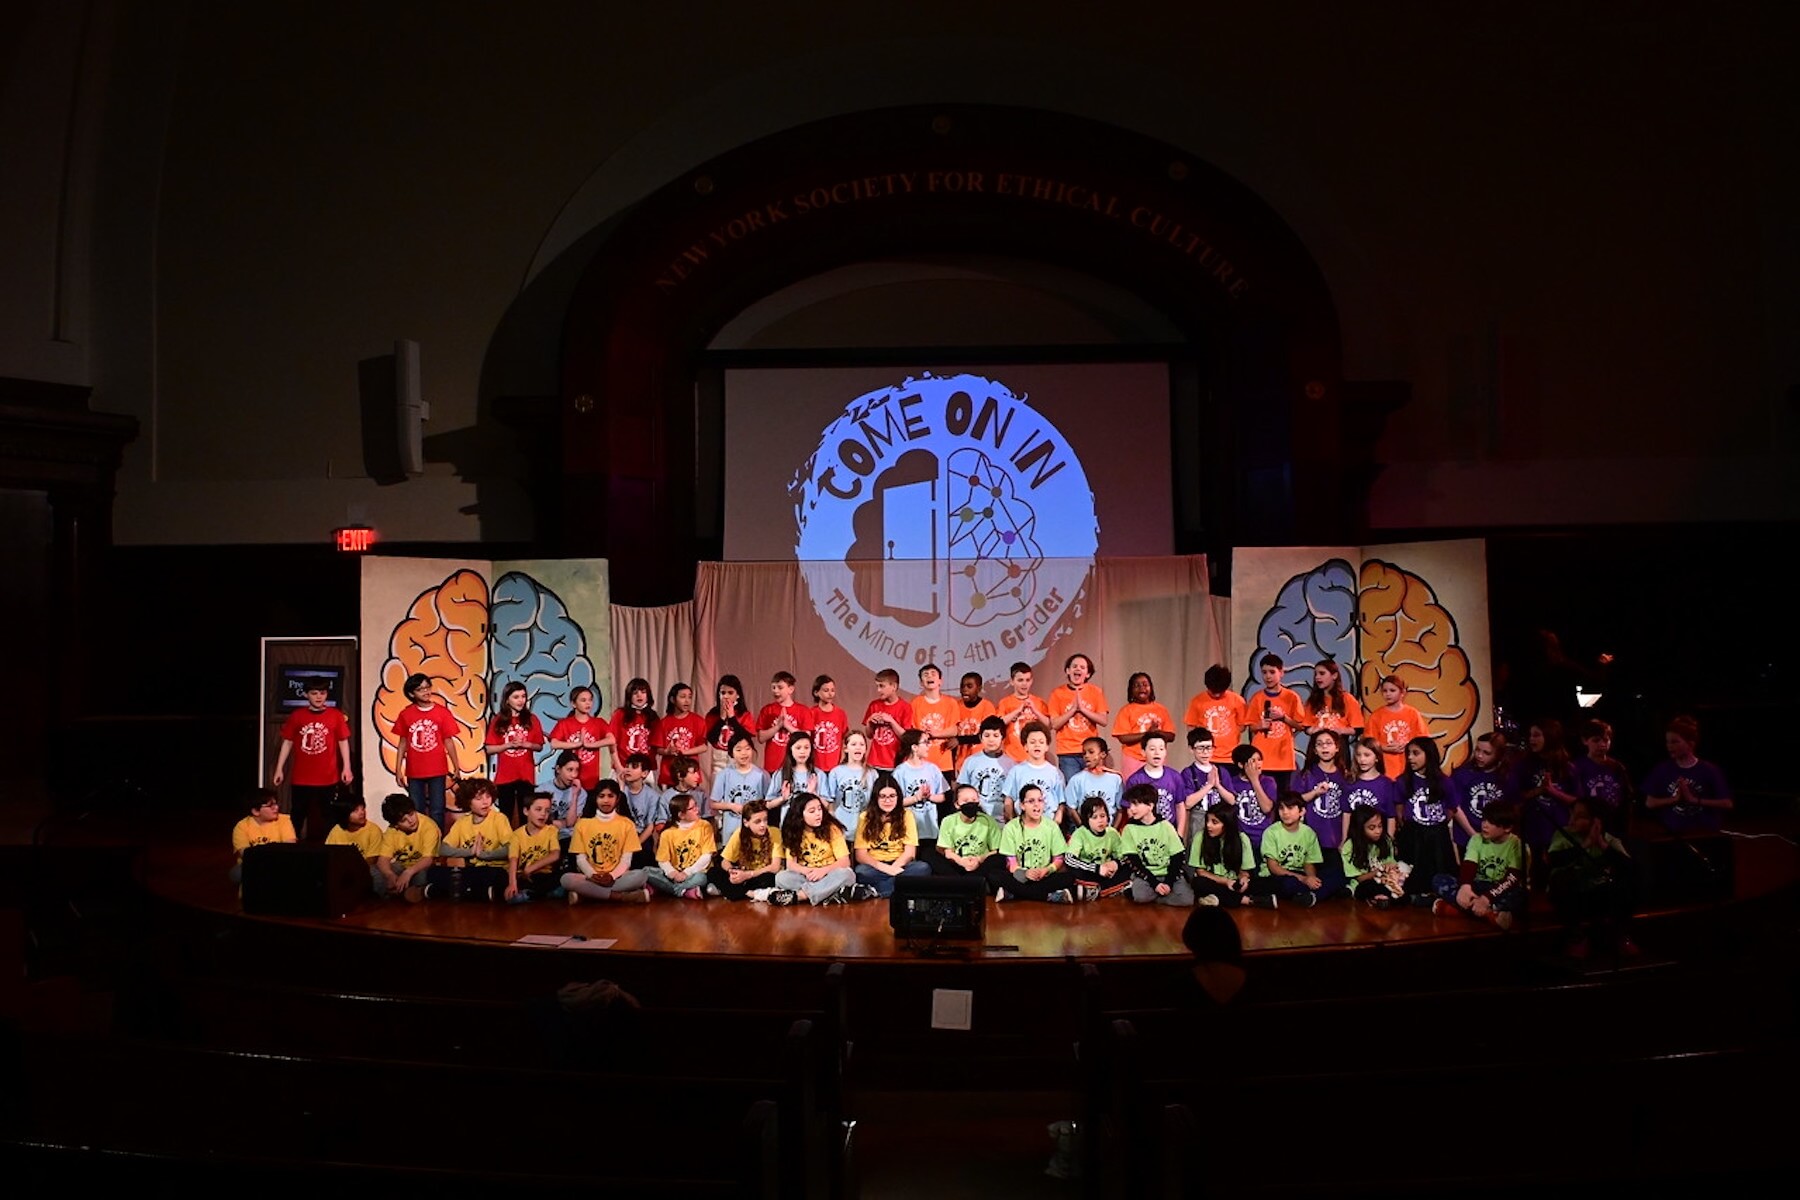 Entire cast of Ethical Culture 4th Grade play poses on stage during performance.